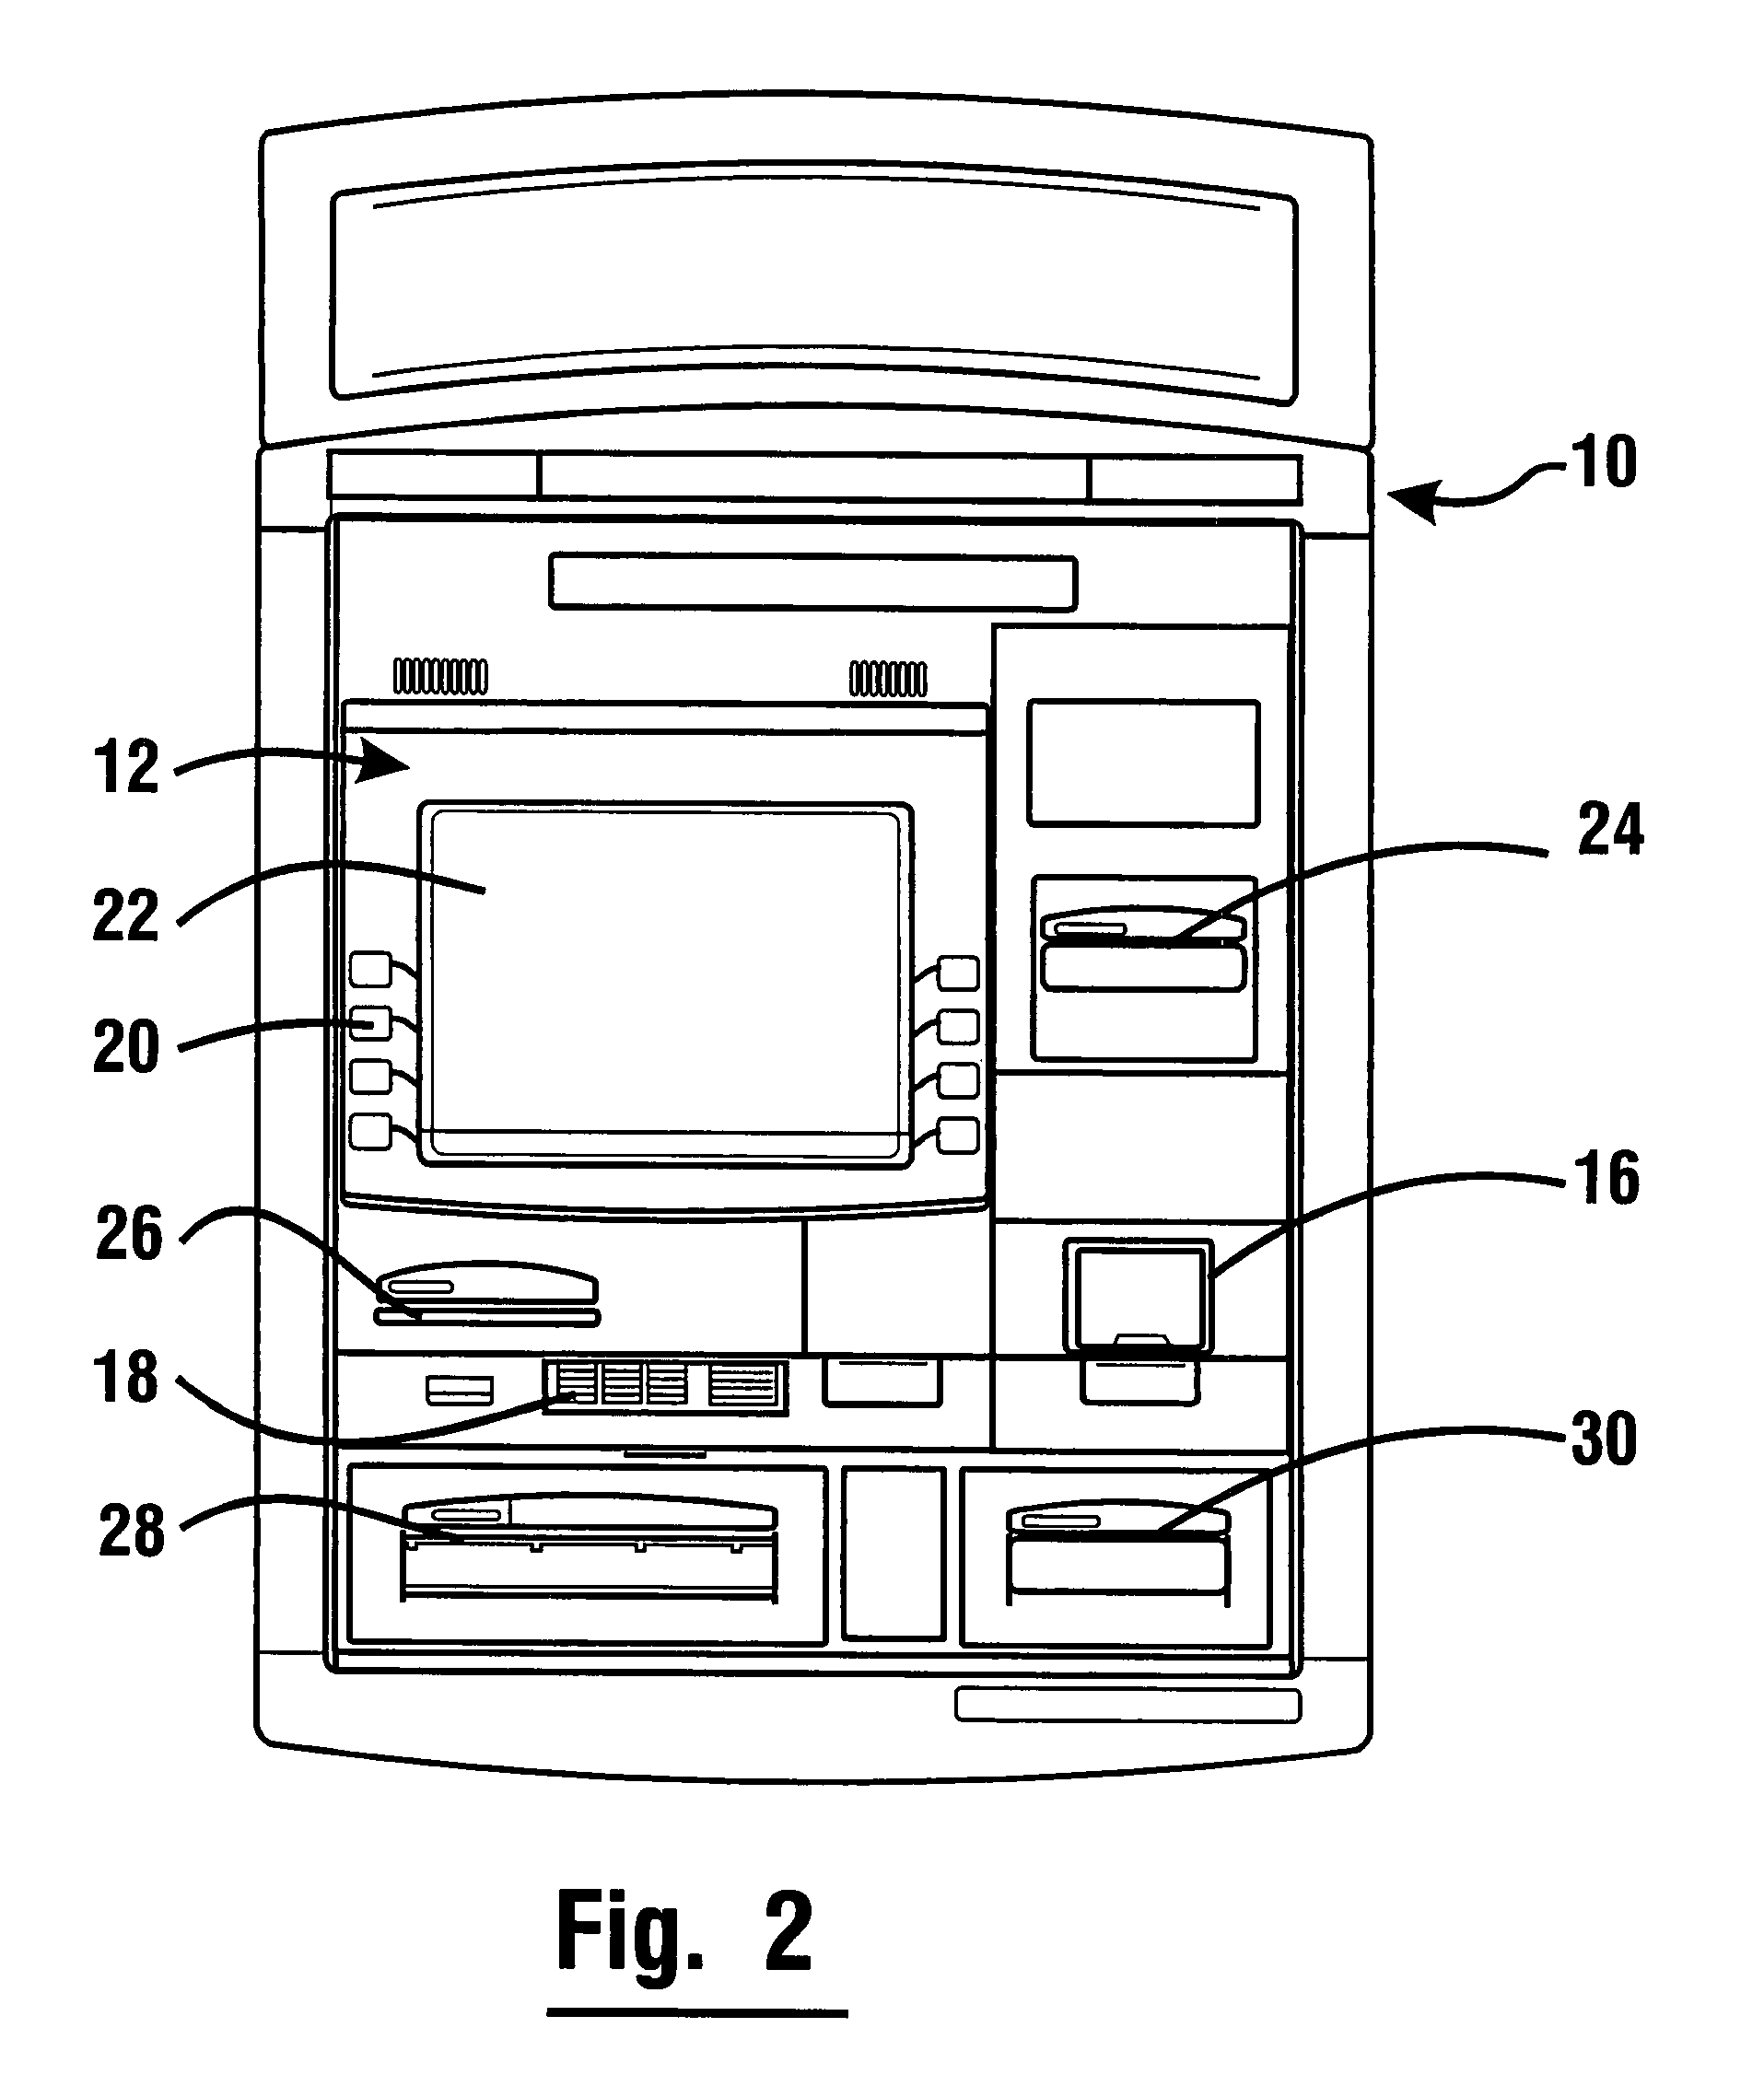 Automated banking machine with noncontact reading of card data